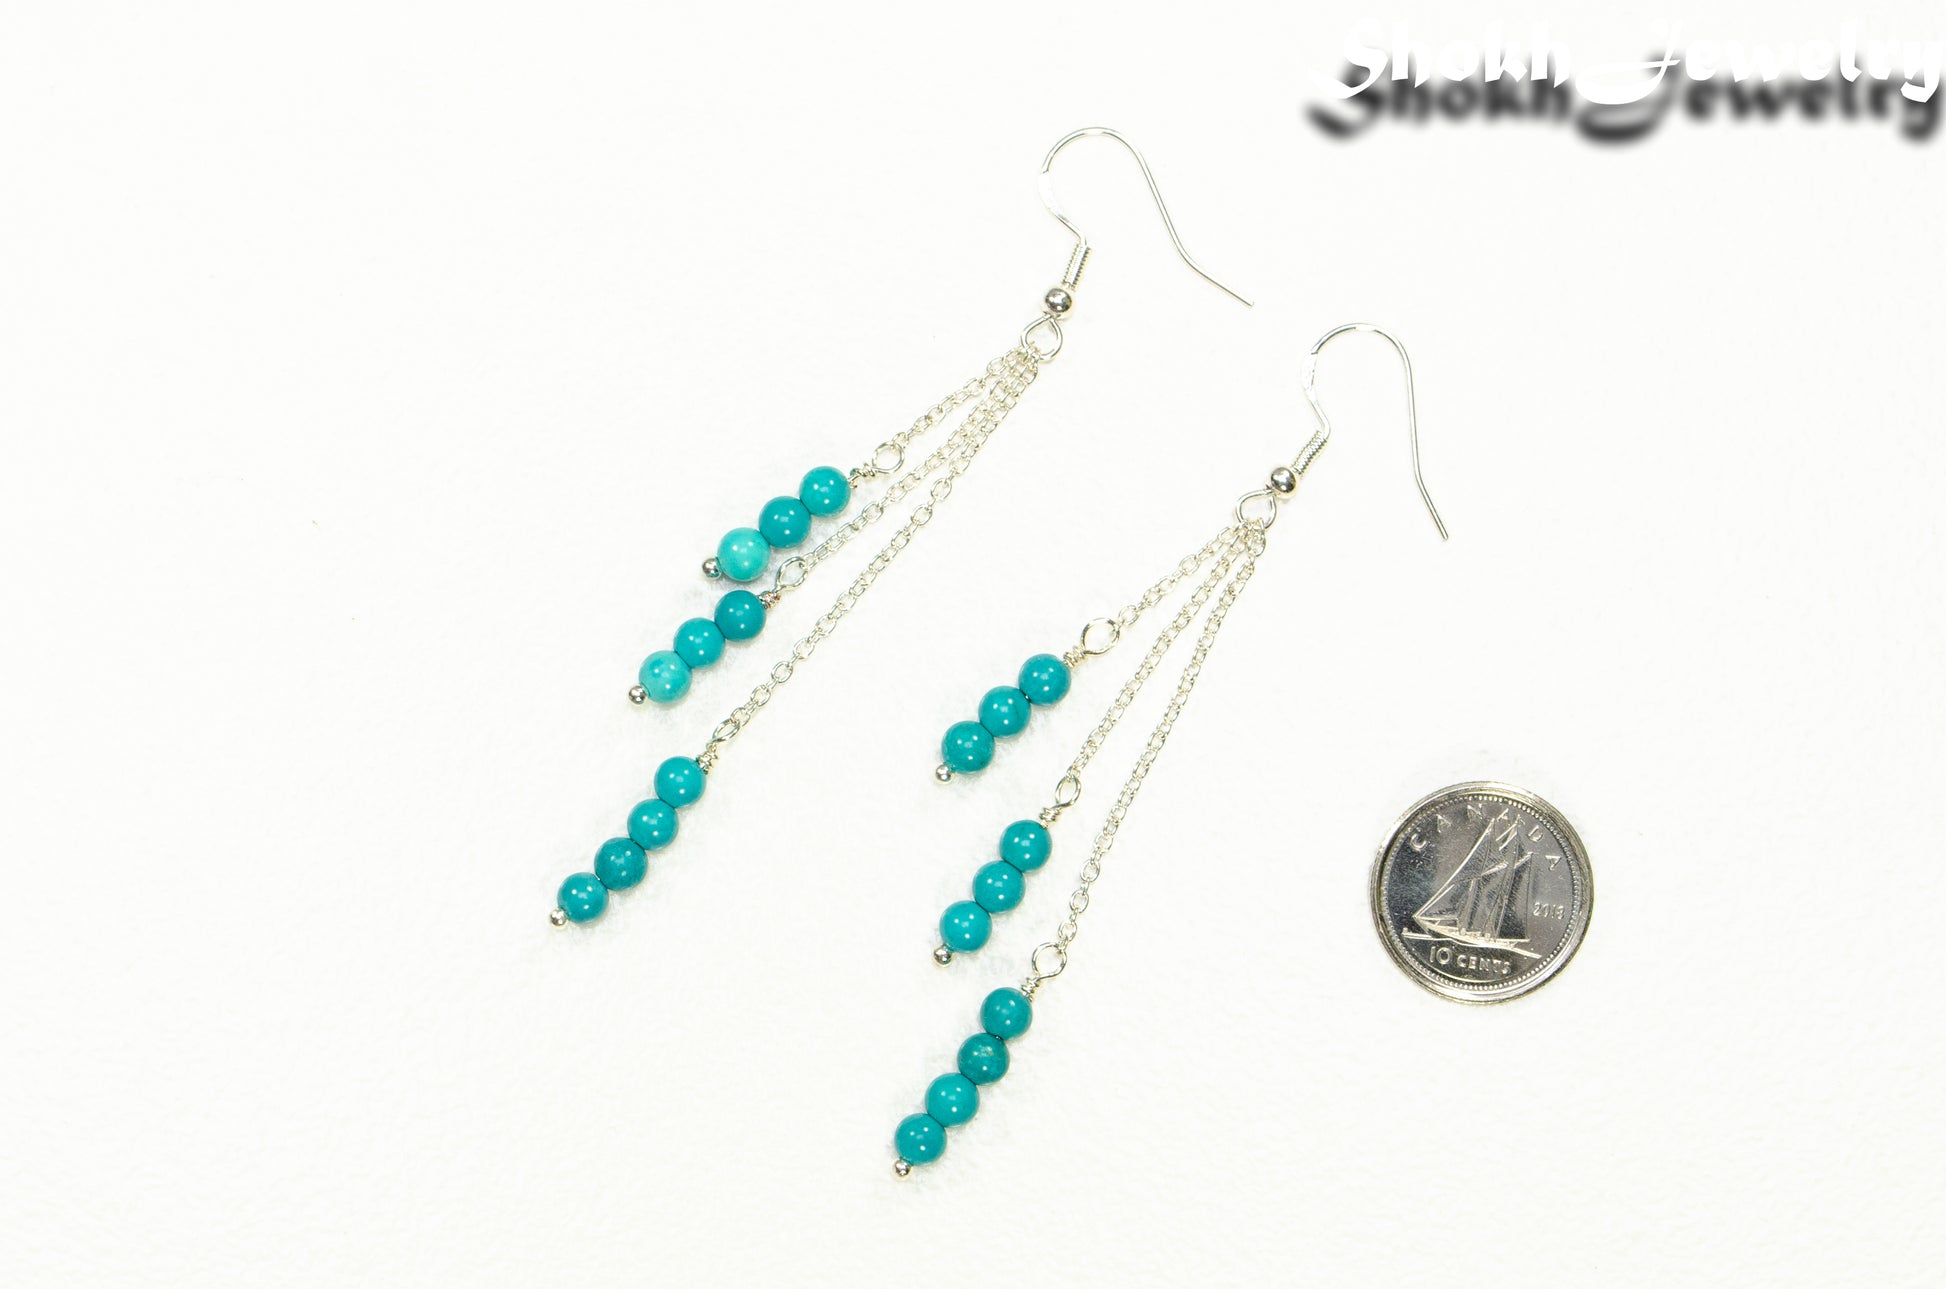 Silver Plated Chain and Turquoise Earrings beside a dime.